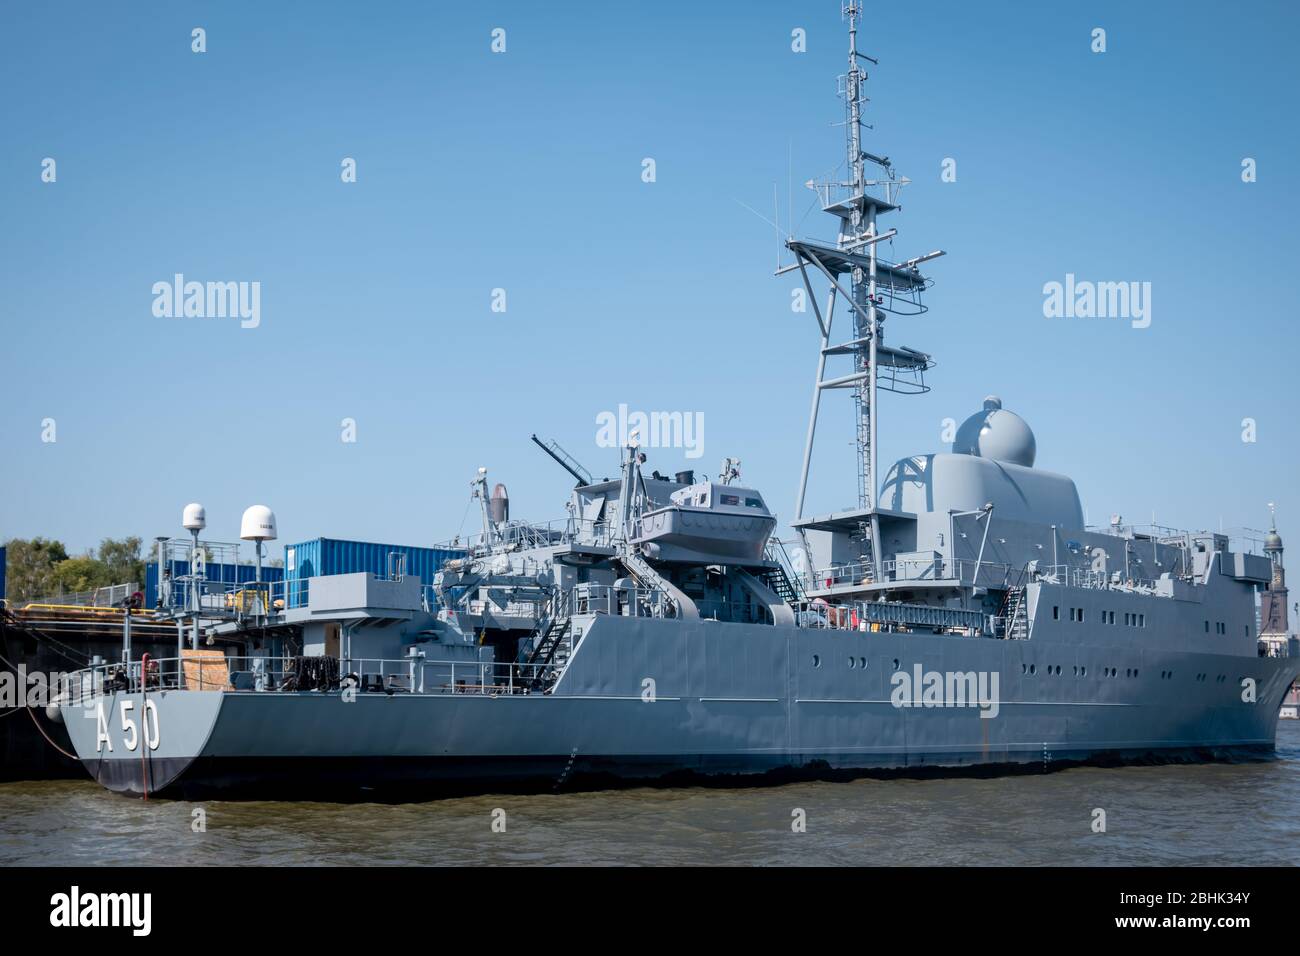 The German Oste-class fleet service ship Alster (A50) - navy auxillary - in the Port of Hamburg Stock Photo